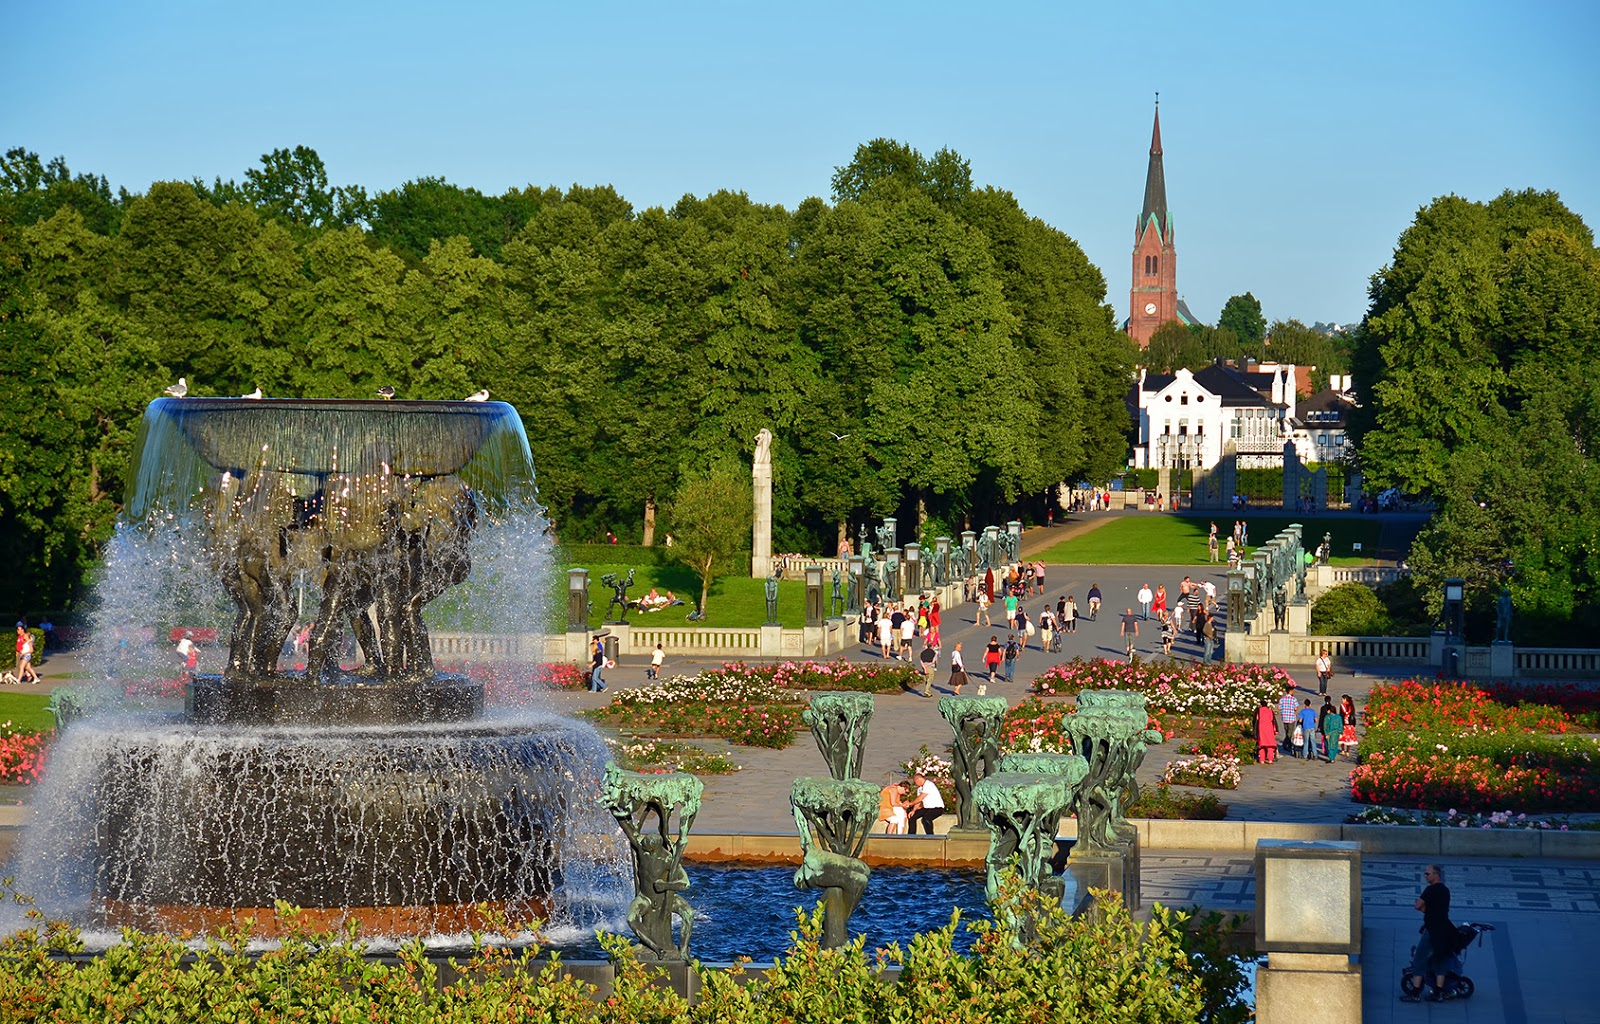 World Visits: Oslo, Norway - Exhibition Place For Visitors